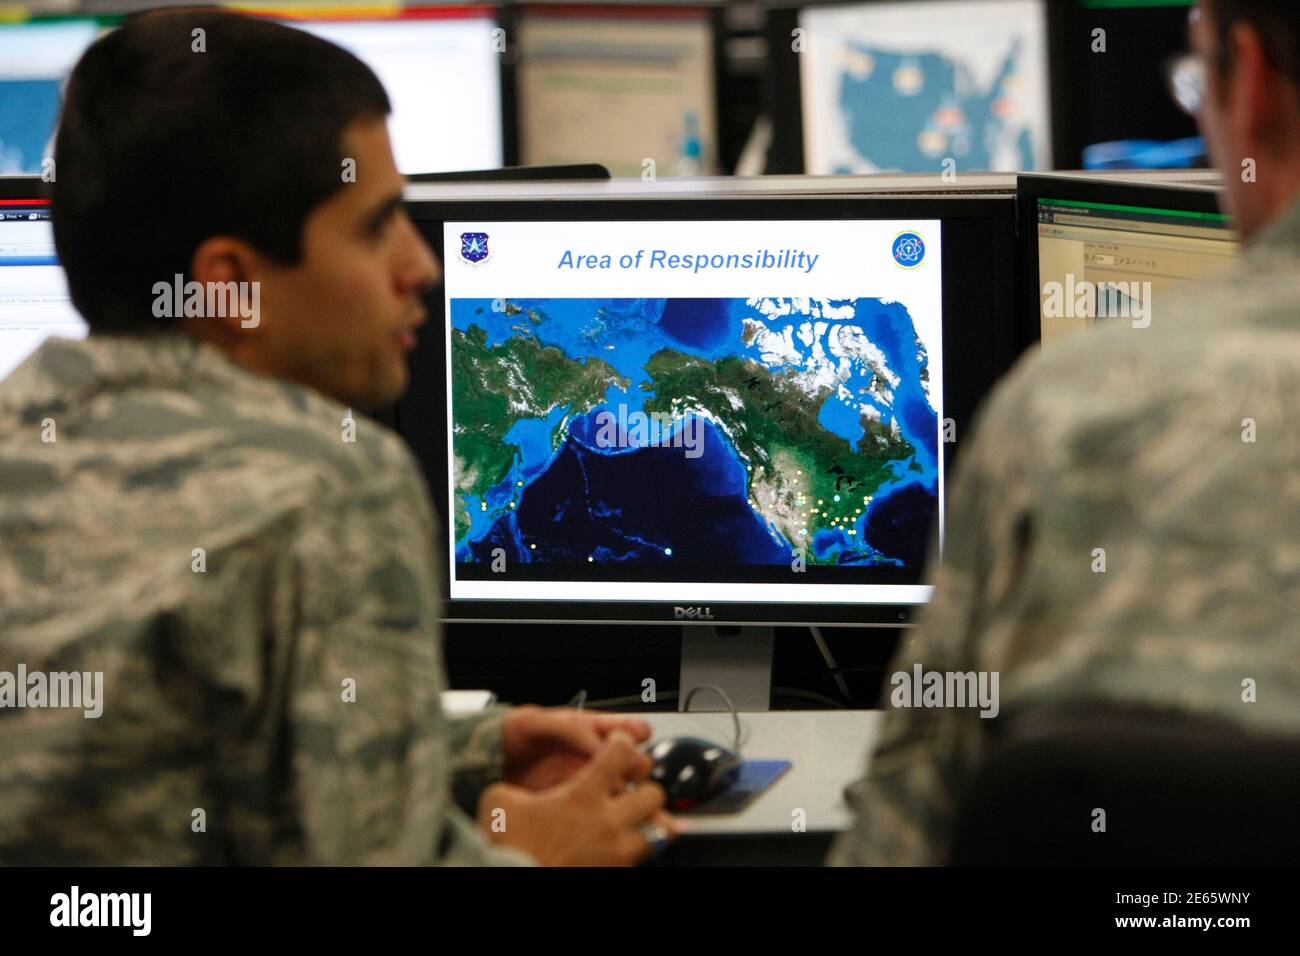 2Lt William Liggett (L) talks with a colleague as a map is displayed on one of the screens at the Air Force Space Command Network Operations & Security Center at Peterson Air Force Base in Colorado Springs, Colorado July 20, 2010. U.S. national security planners are proposing that the 21st century's critical infrastructure -- power grids, communications, water utilities, financial networks -- be similarly shielded from cyber marauders and other foes. The ramparts would be virtual, their perimeters policed by the Pentagon and backed by digital weapons capable of circling the globe in millisecon Stock Photo